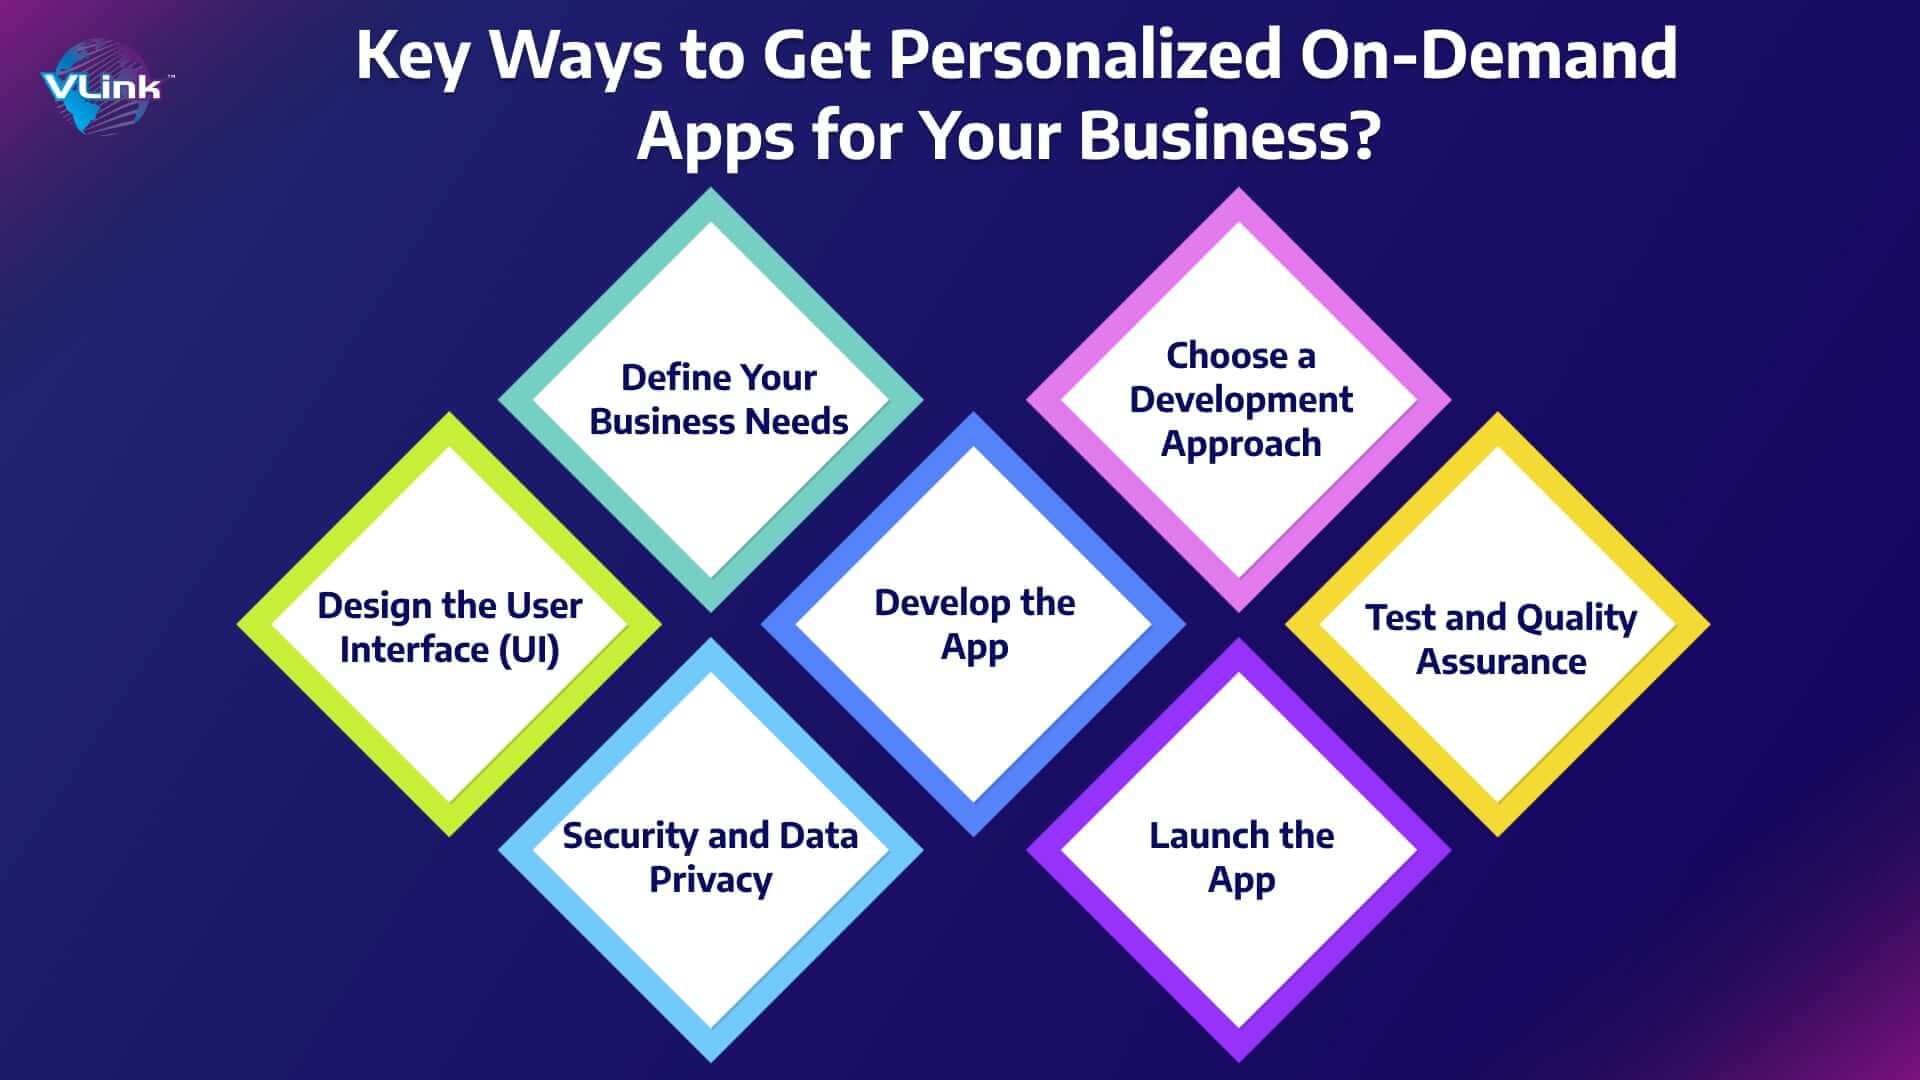 How to Get Personalized On-Demand Apps for Your Business